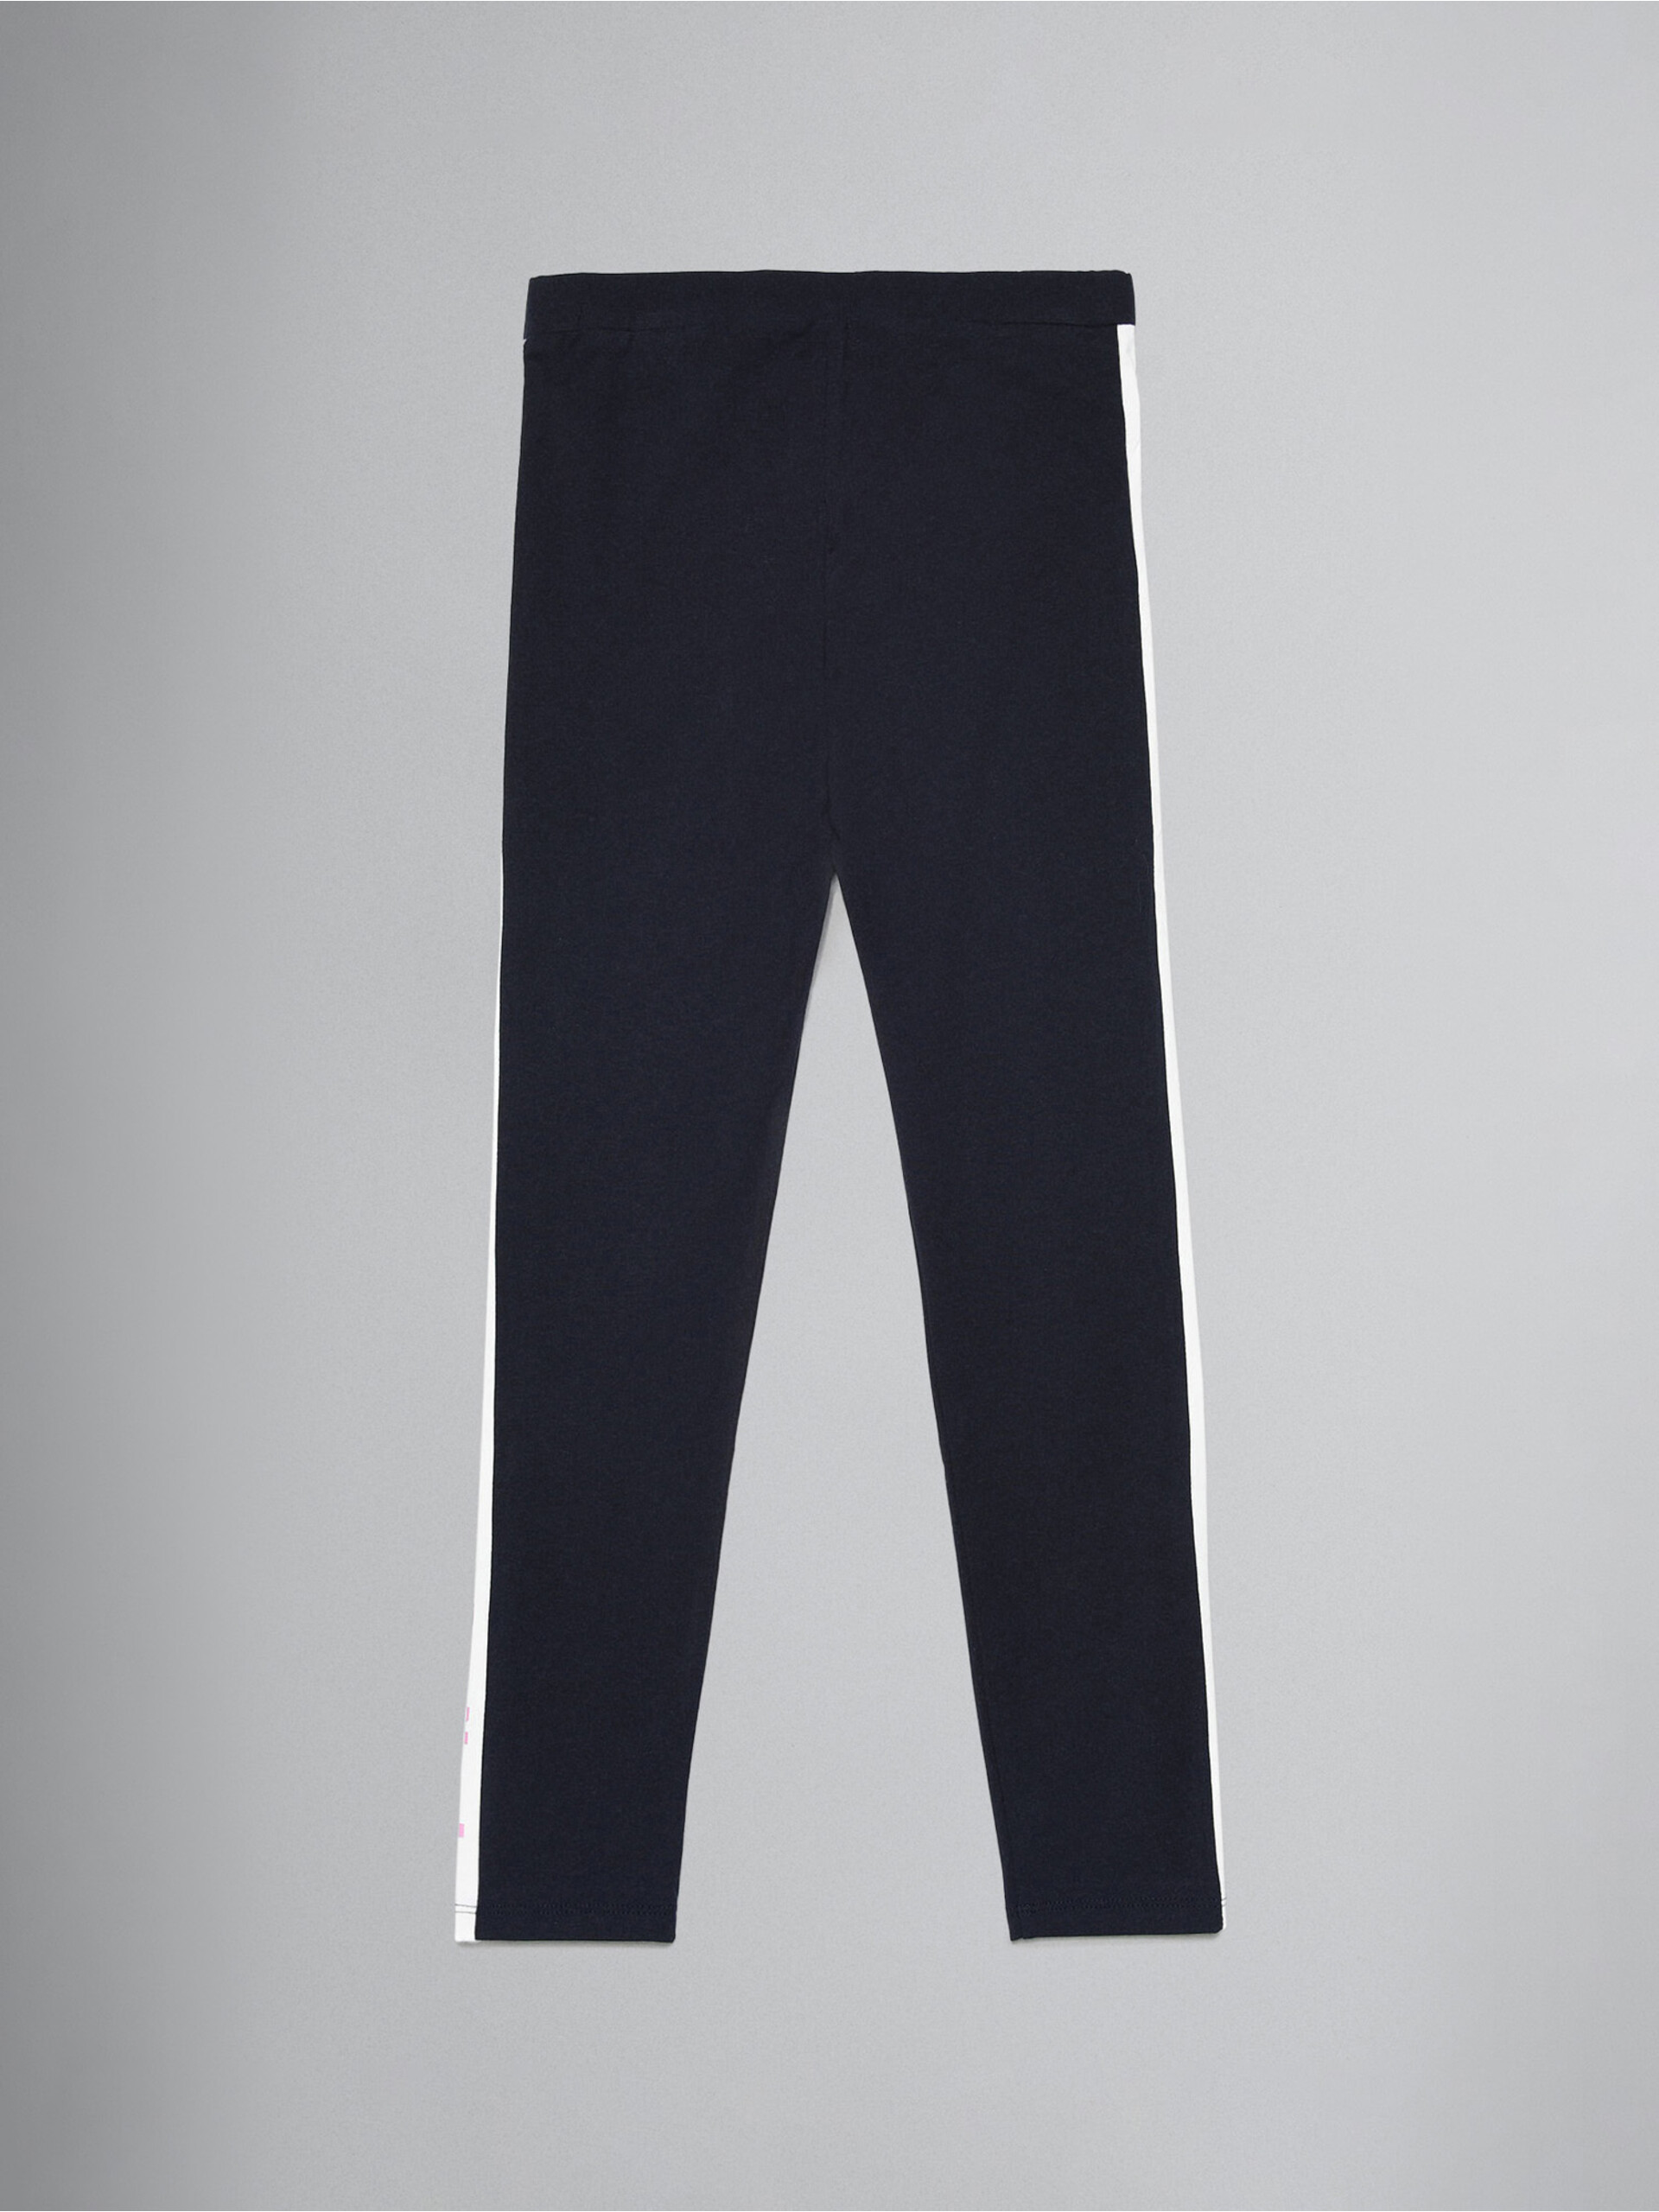 Navy blue leggings with logo bands - Pants - Image 2